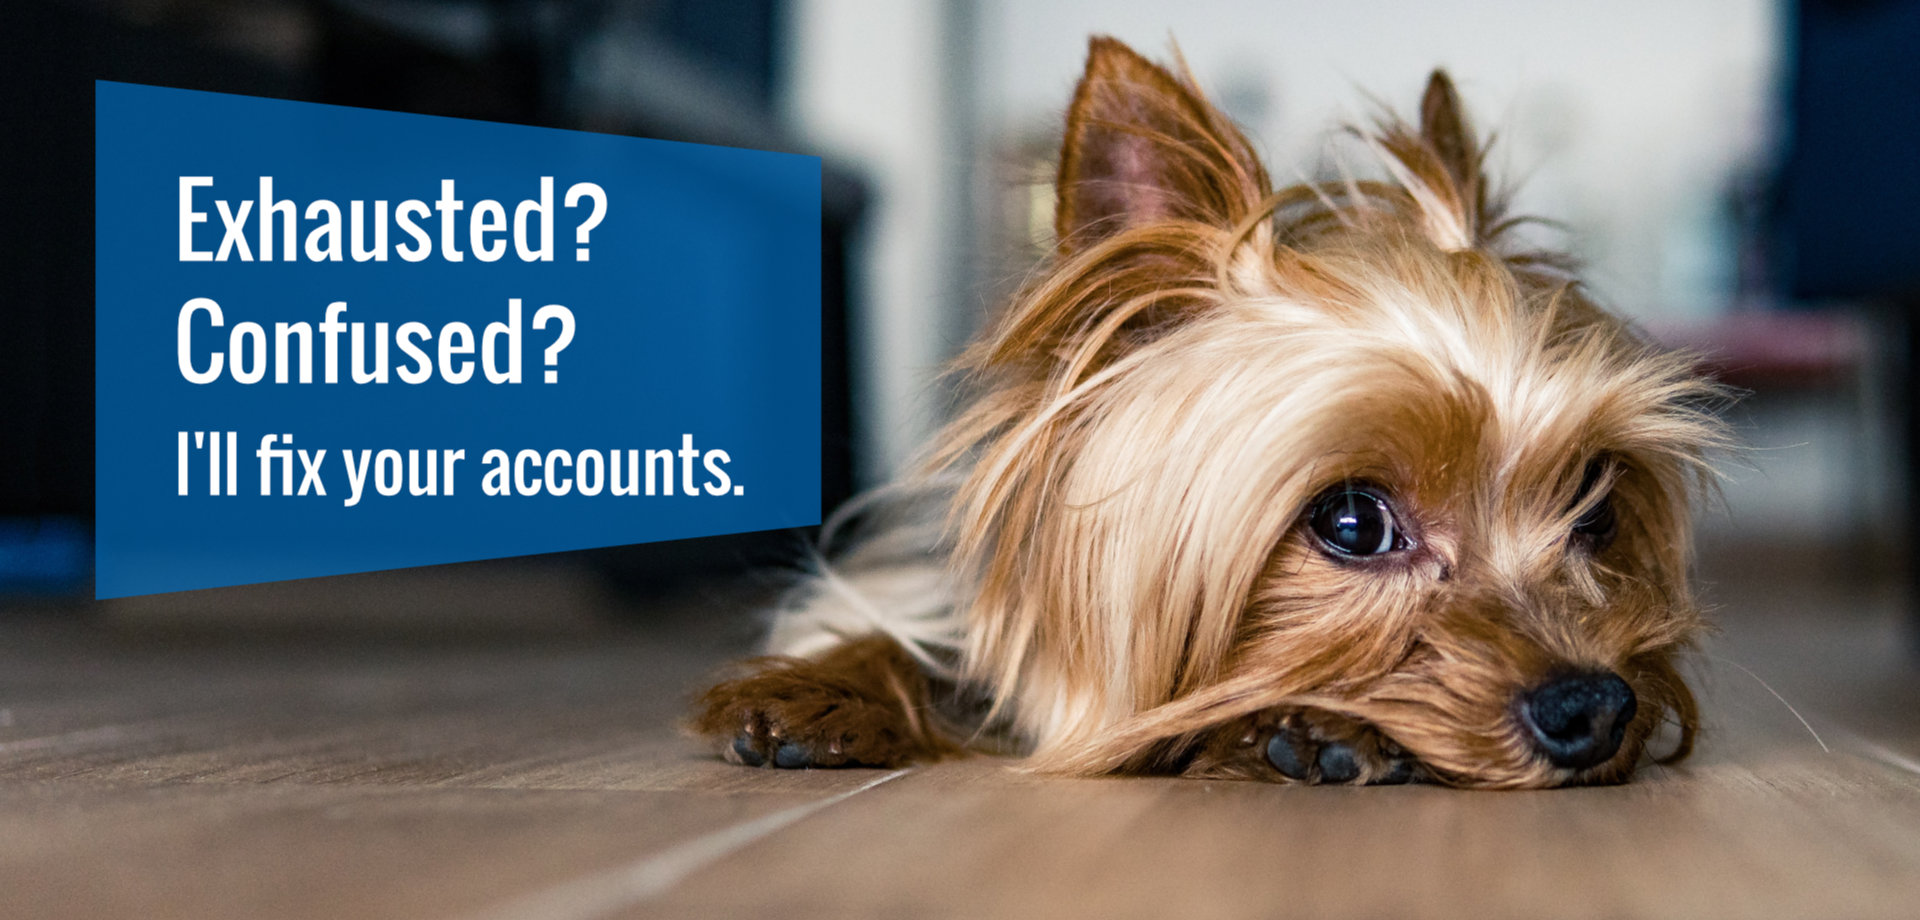 Exhausted? Confused? I'll fix your accounts.